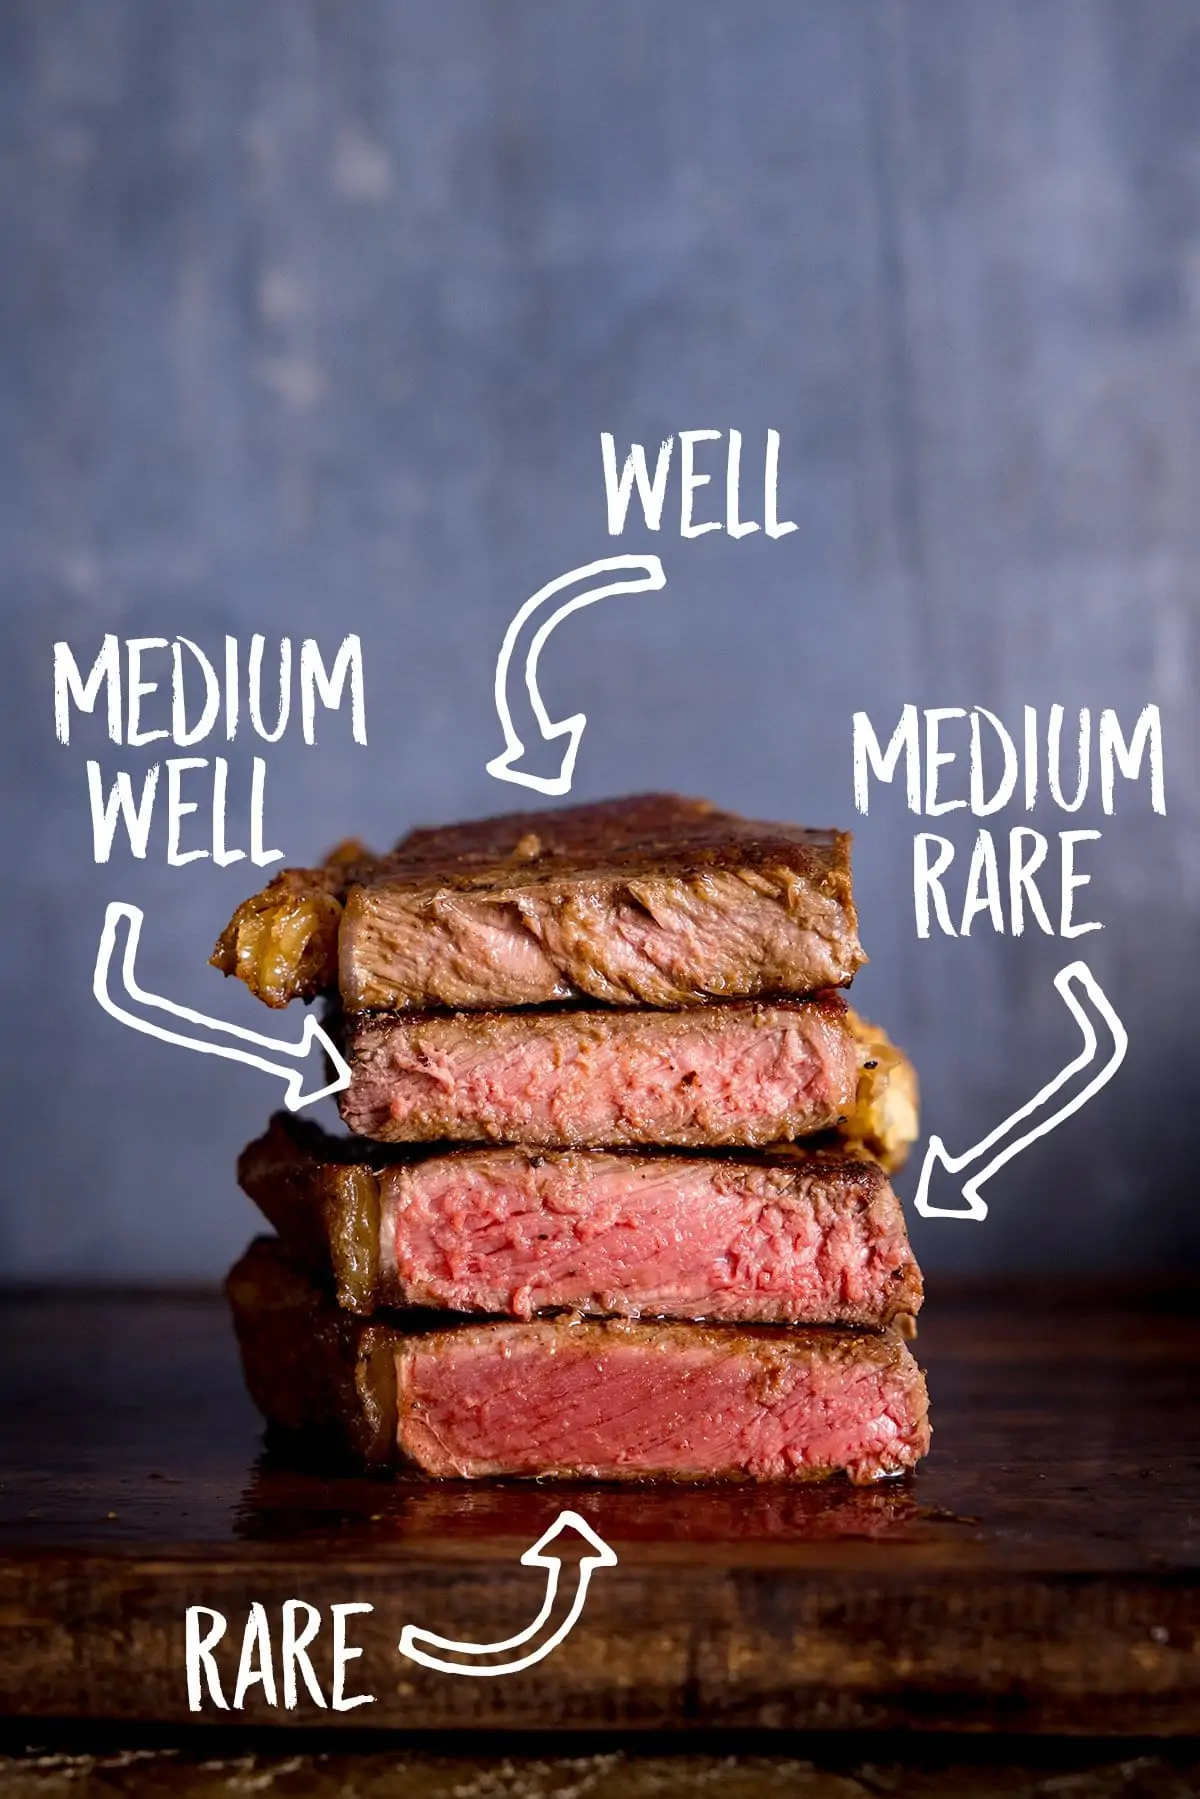 How best to know your steak temperature